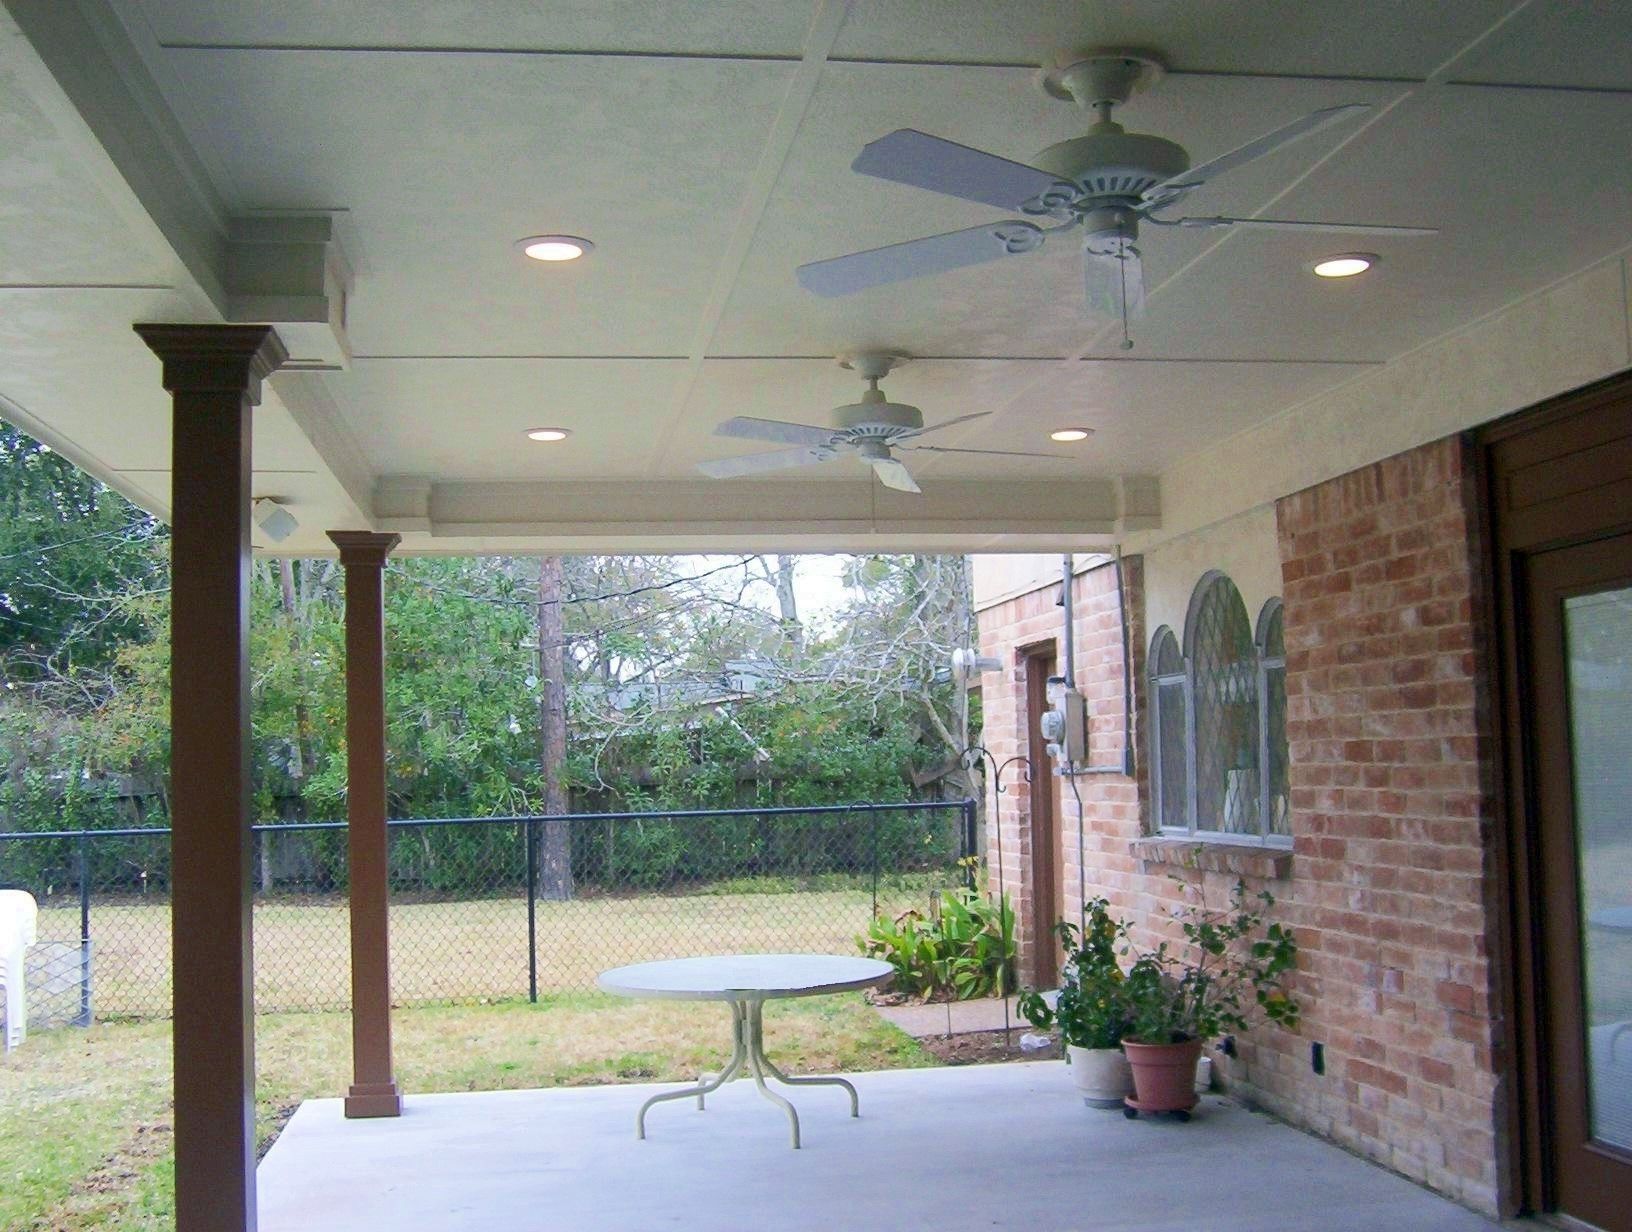 Fabulous Outdoor Patio Ceiling Fans Cool Outdoor Ceiling Fans Patio For Latest Outdoor Porch Ceiling Fans With Lights (View 11 of 20)